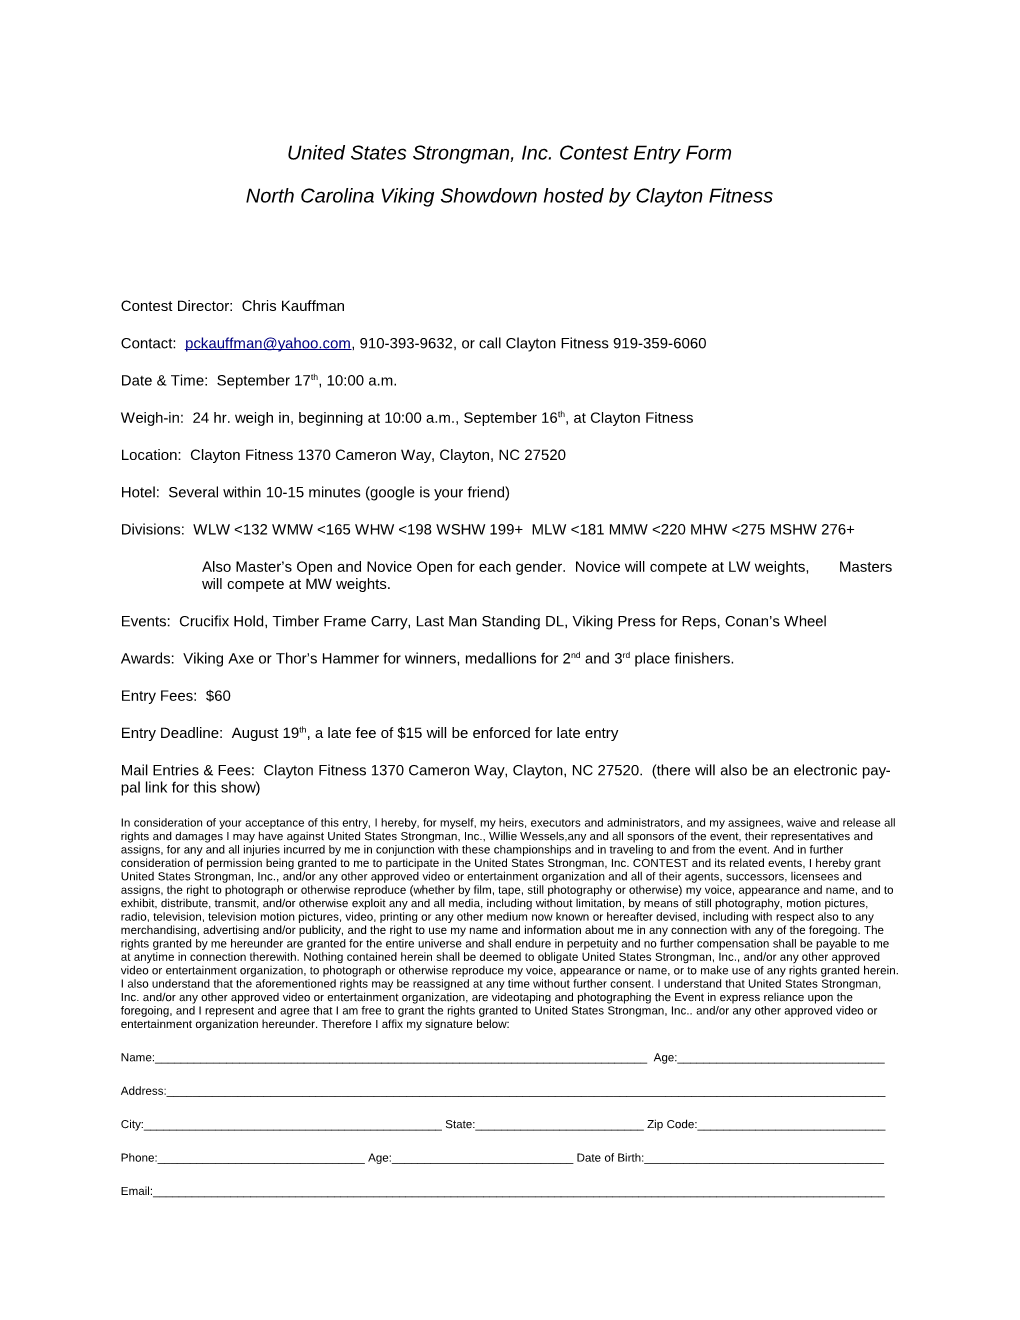 United States Strongman, Inc. Contest Entry Form